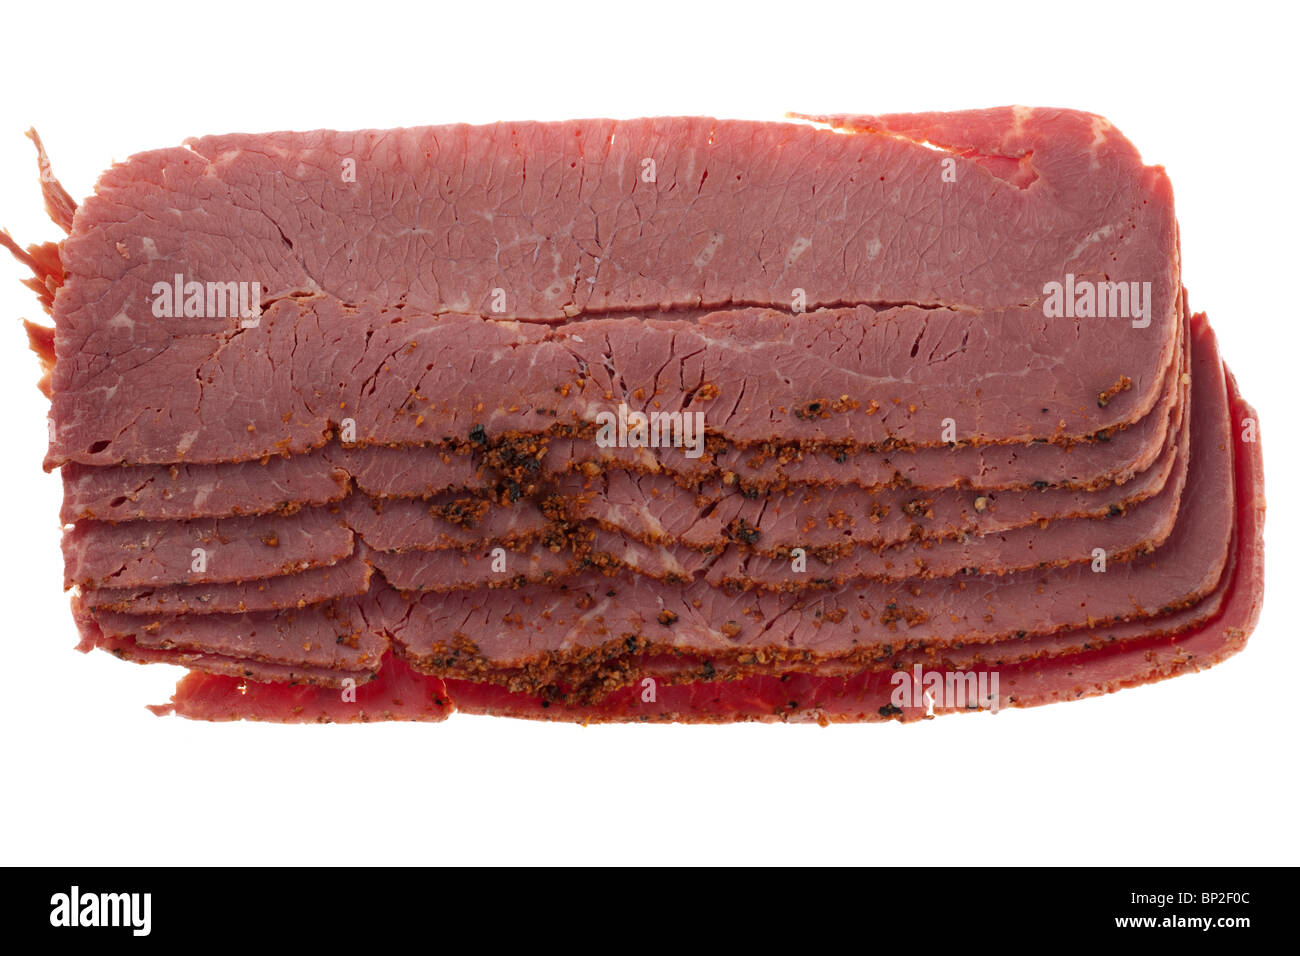 8 slices of Pastrami processed meat Stock Photo